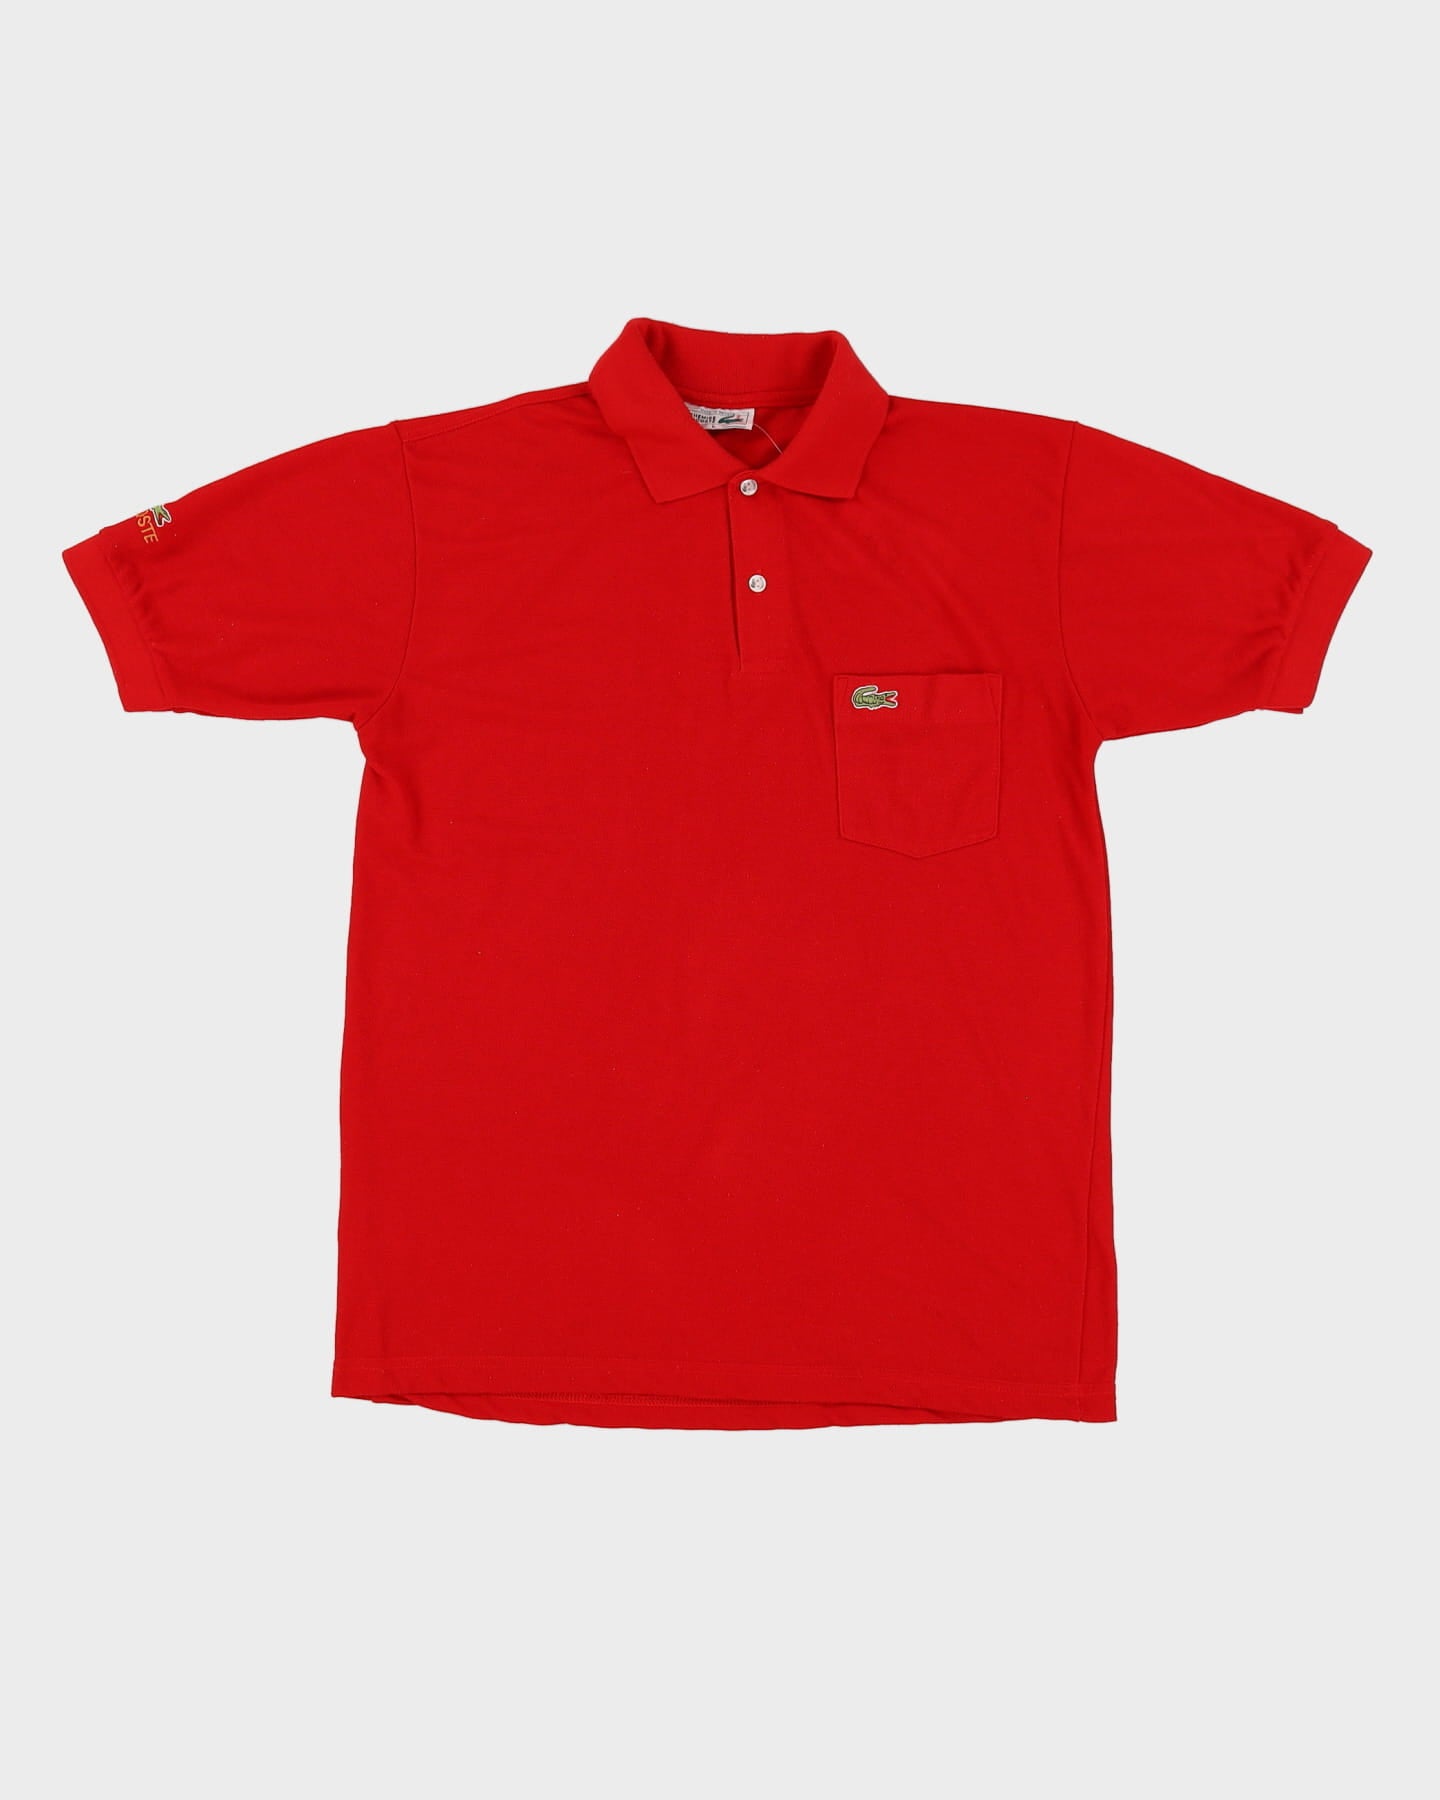 80s Lacoste Red Polo Shirt - S / M